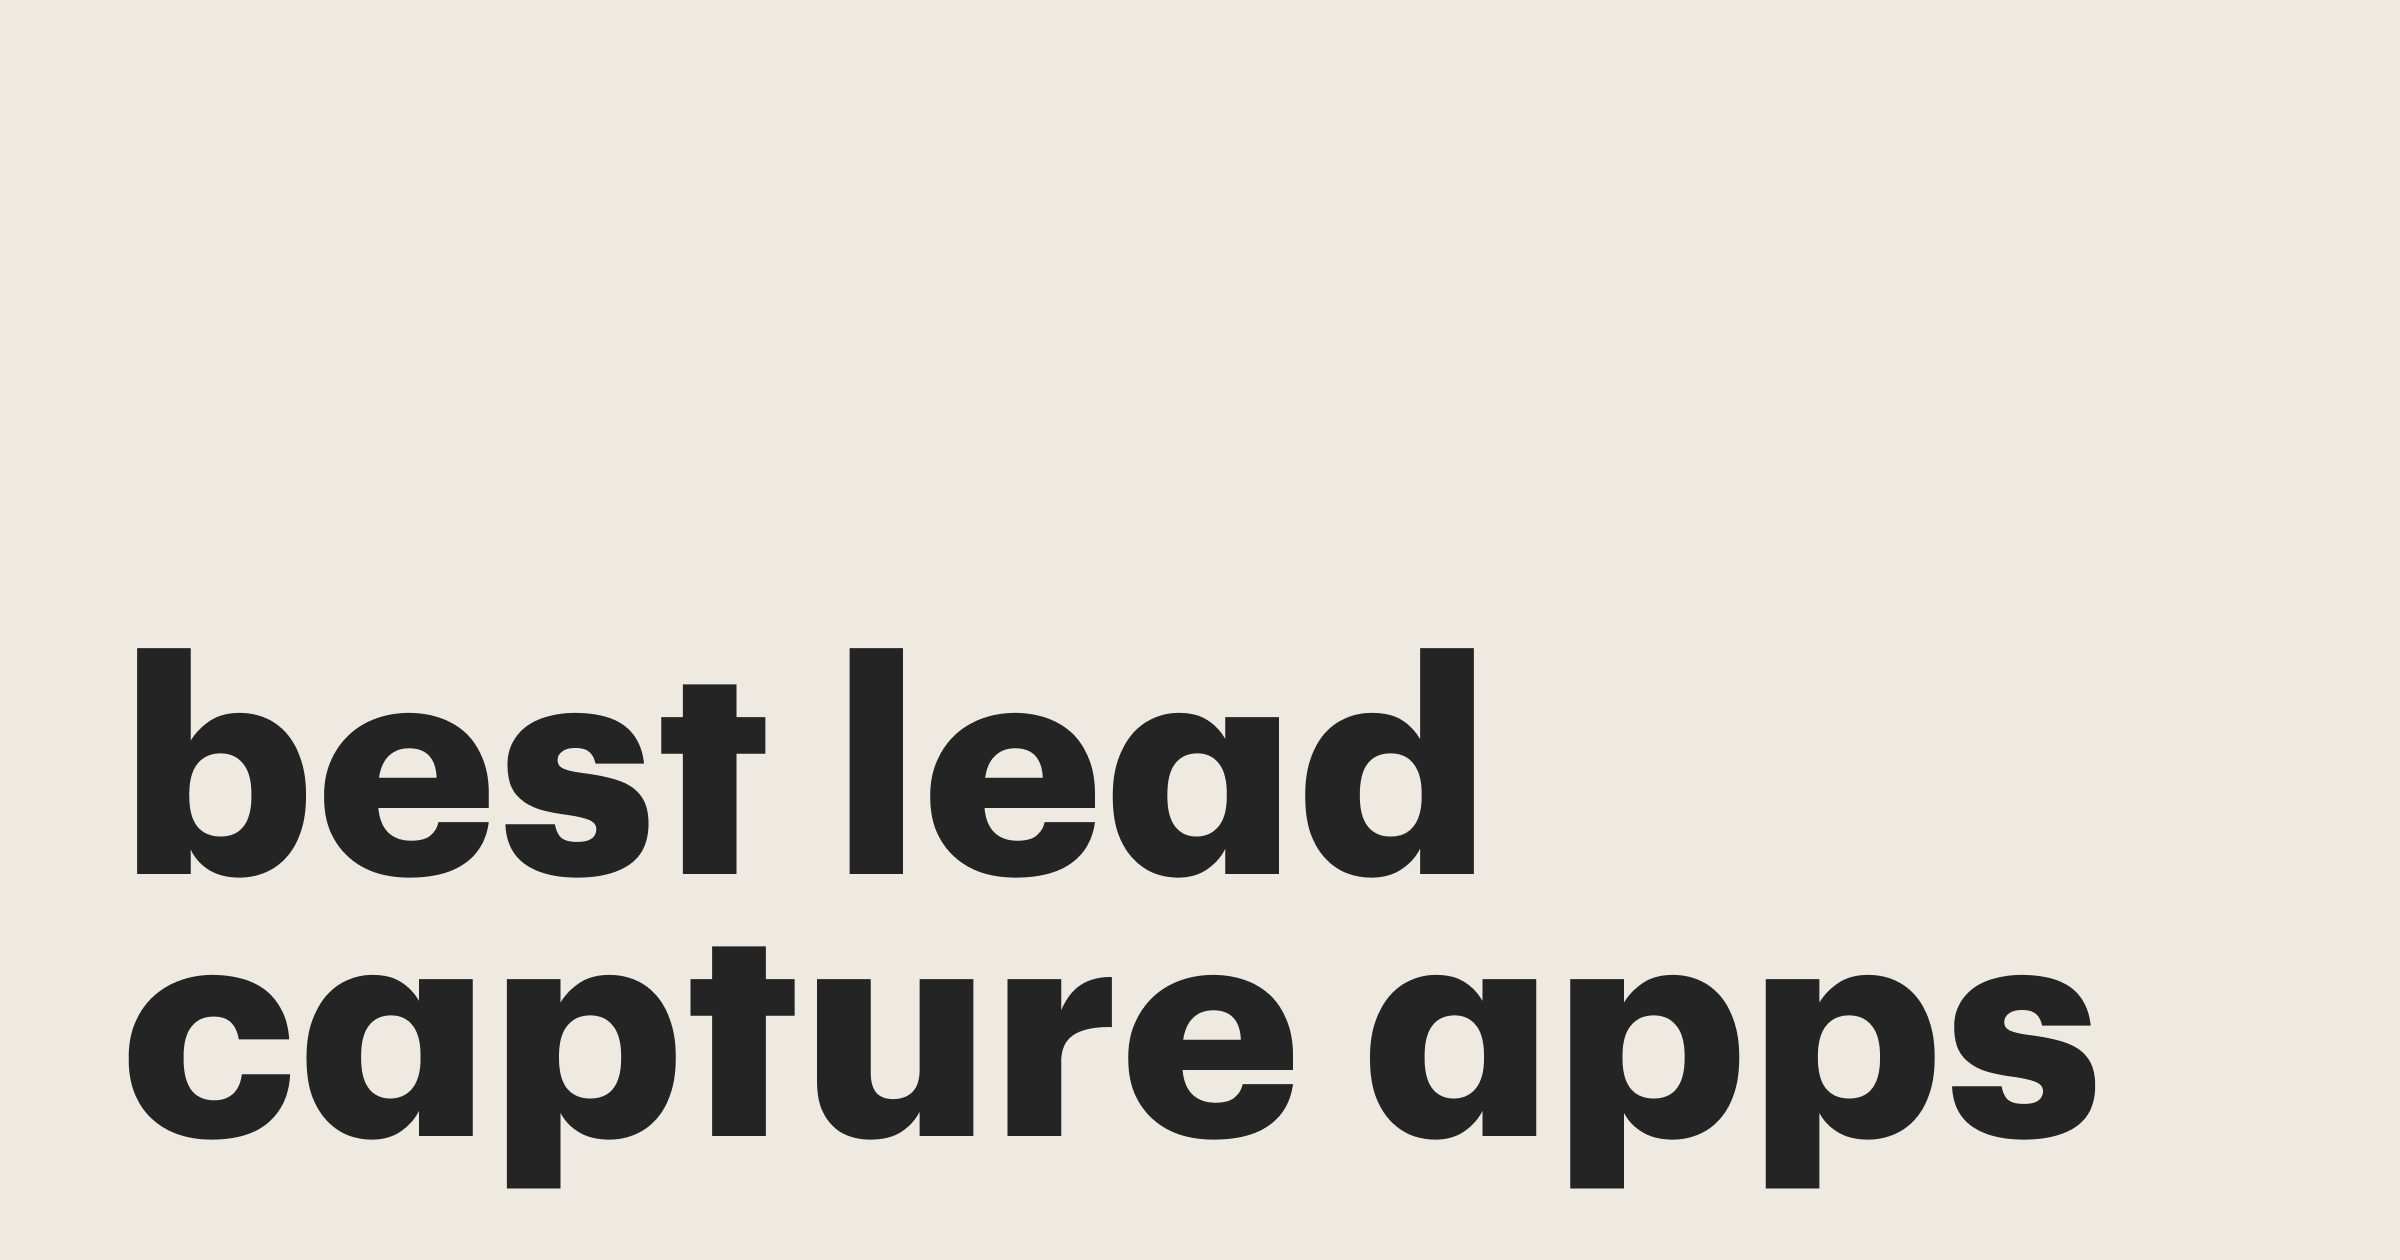 7 Best lead capture apps for SMBs to grow business like never before